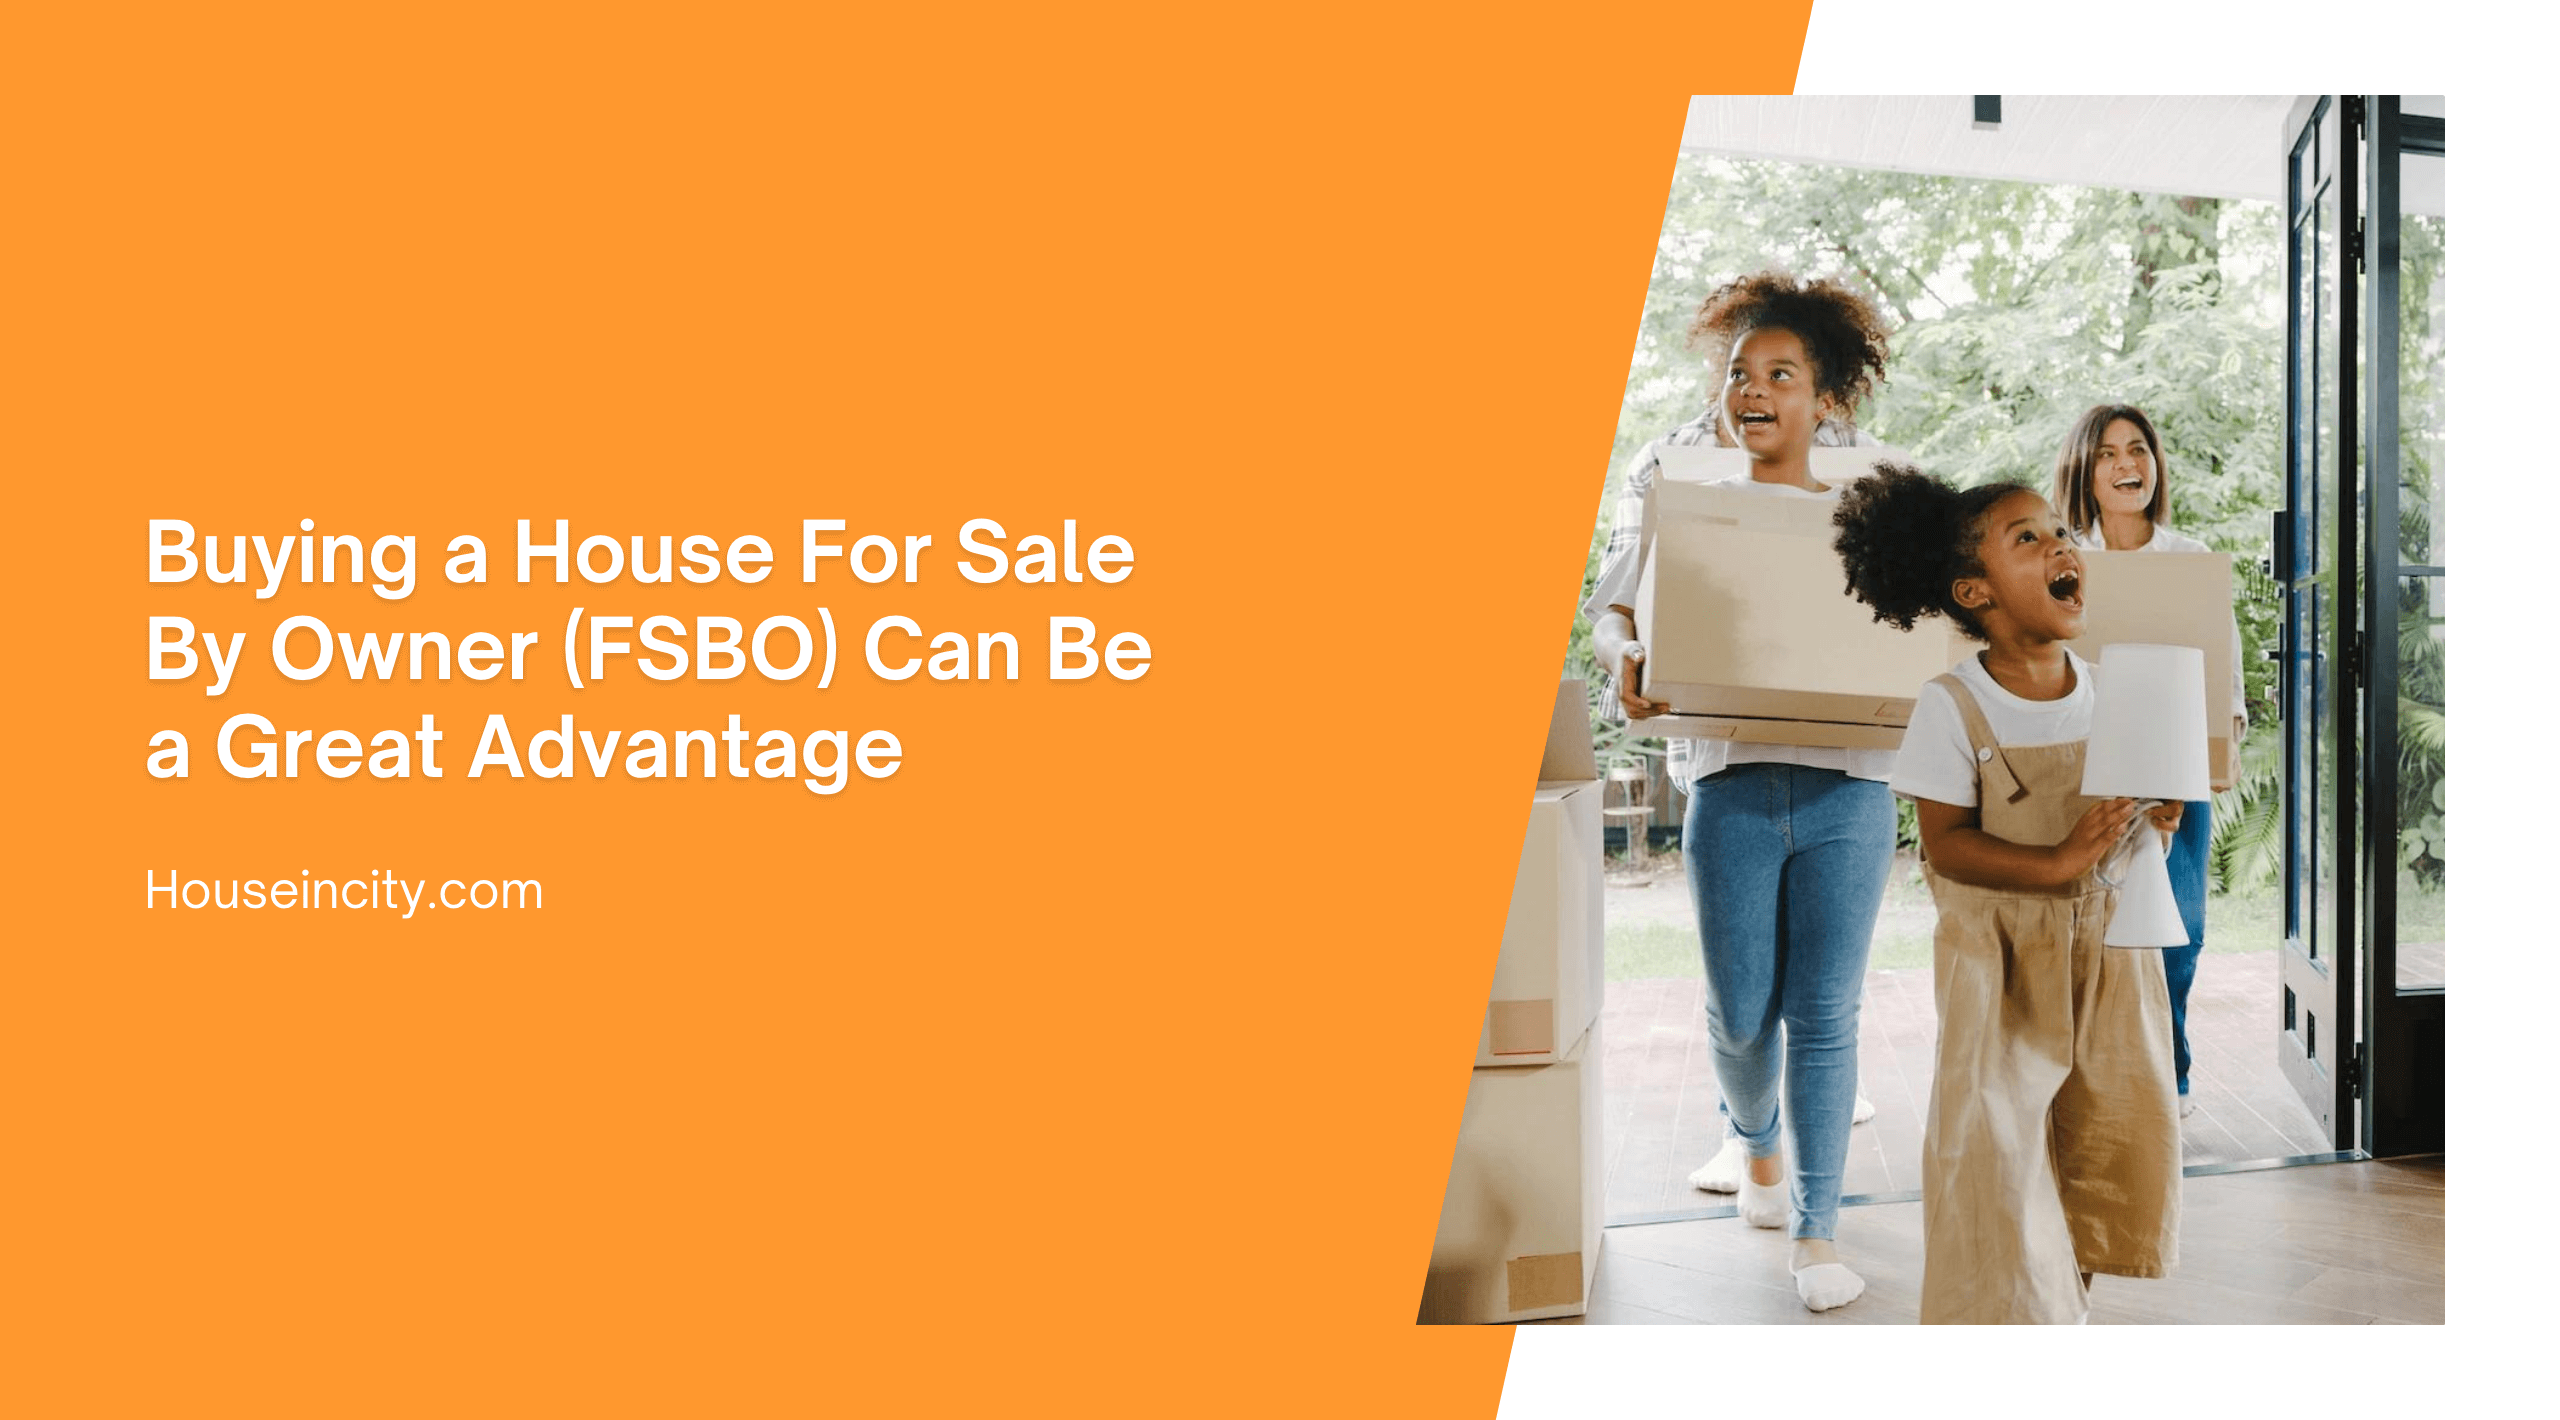 Buying a House For Sale By Owner (FSBO) Can Be a Great Advantage